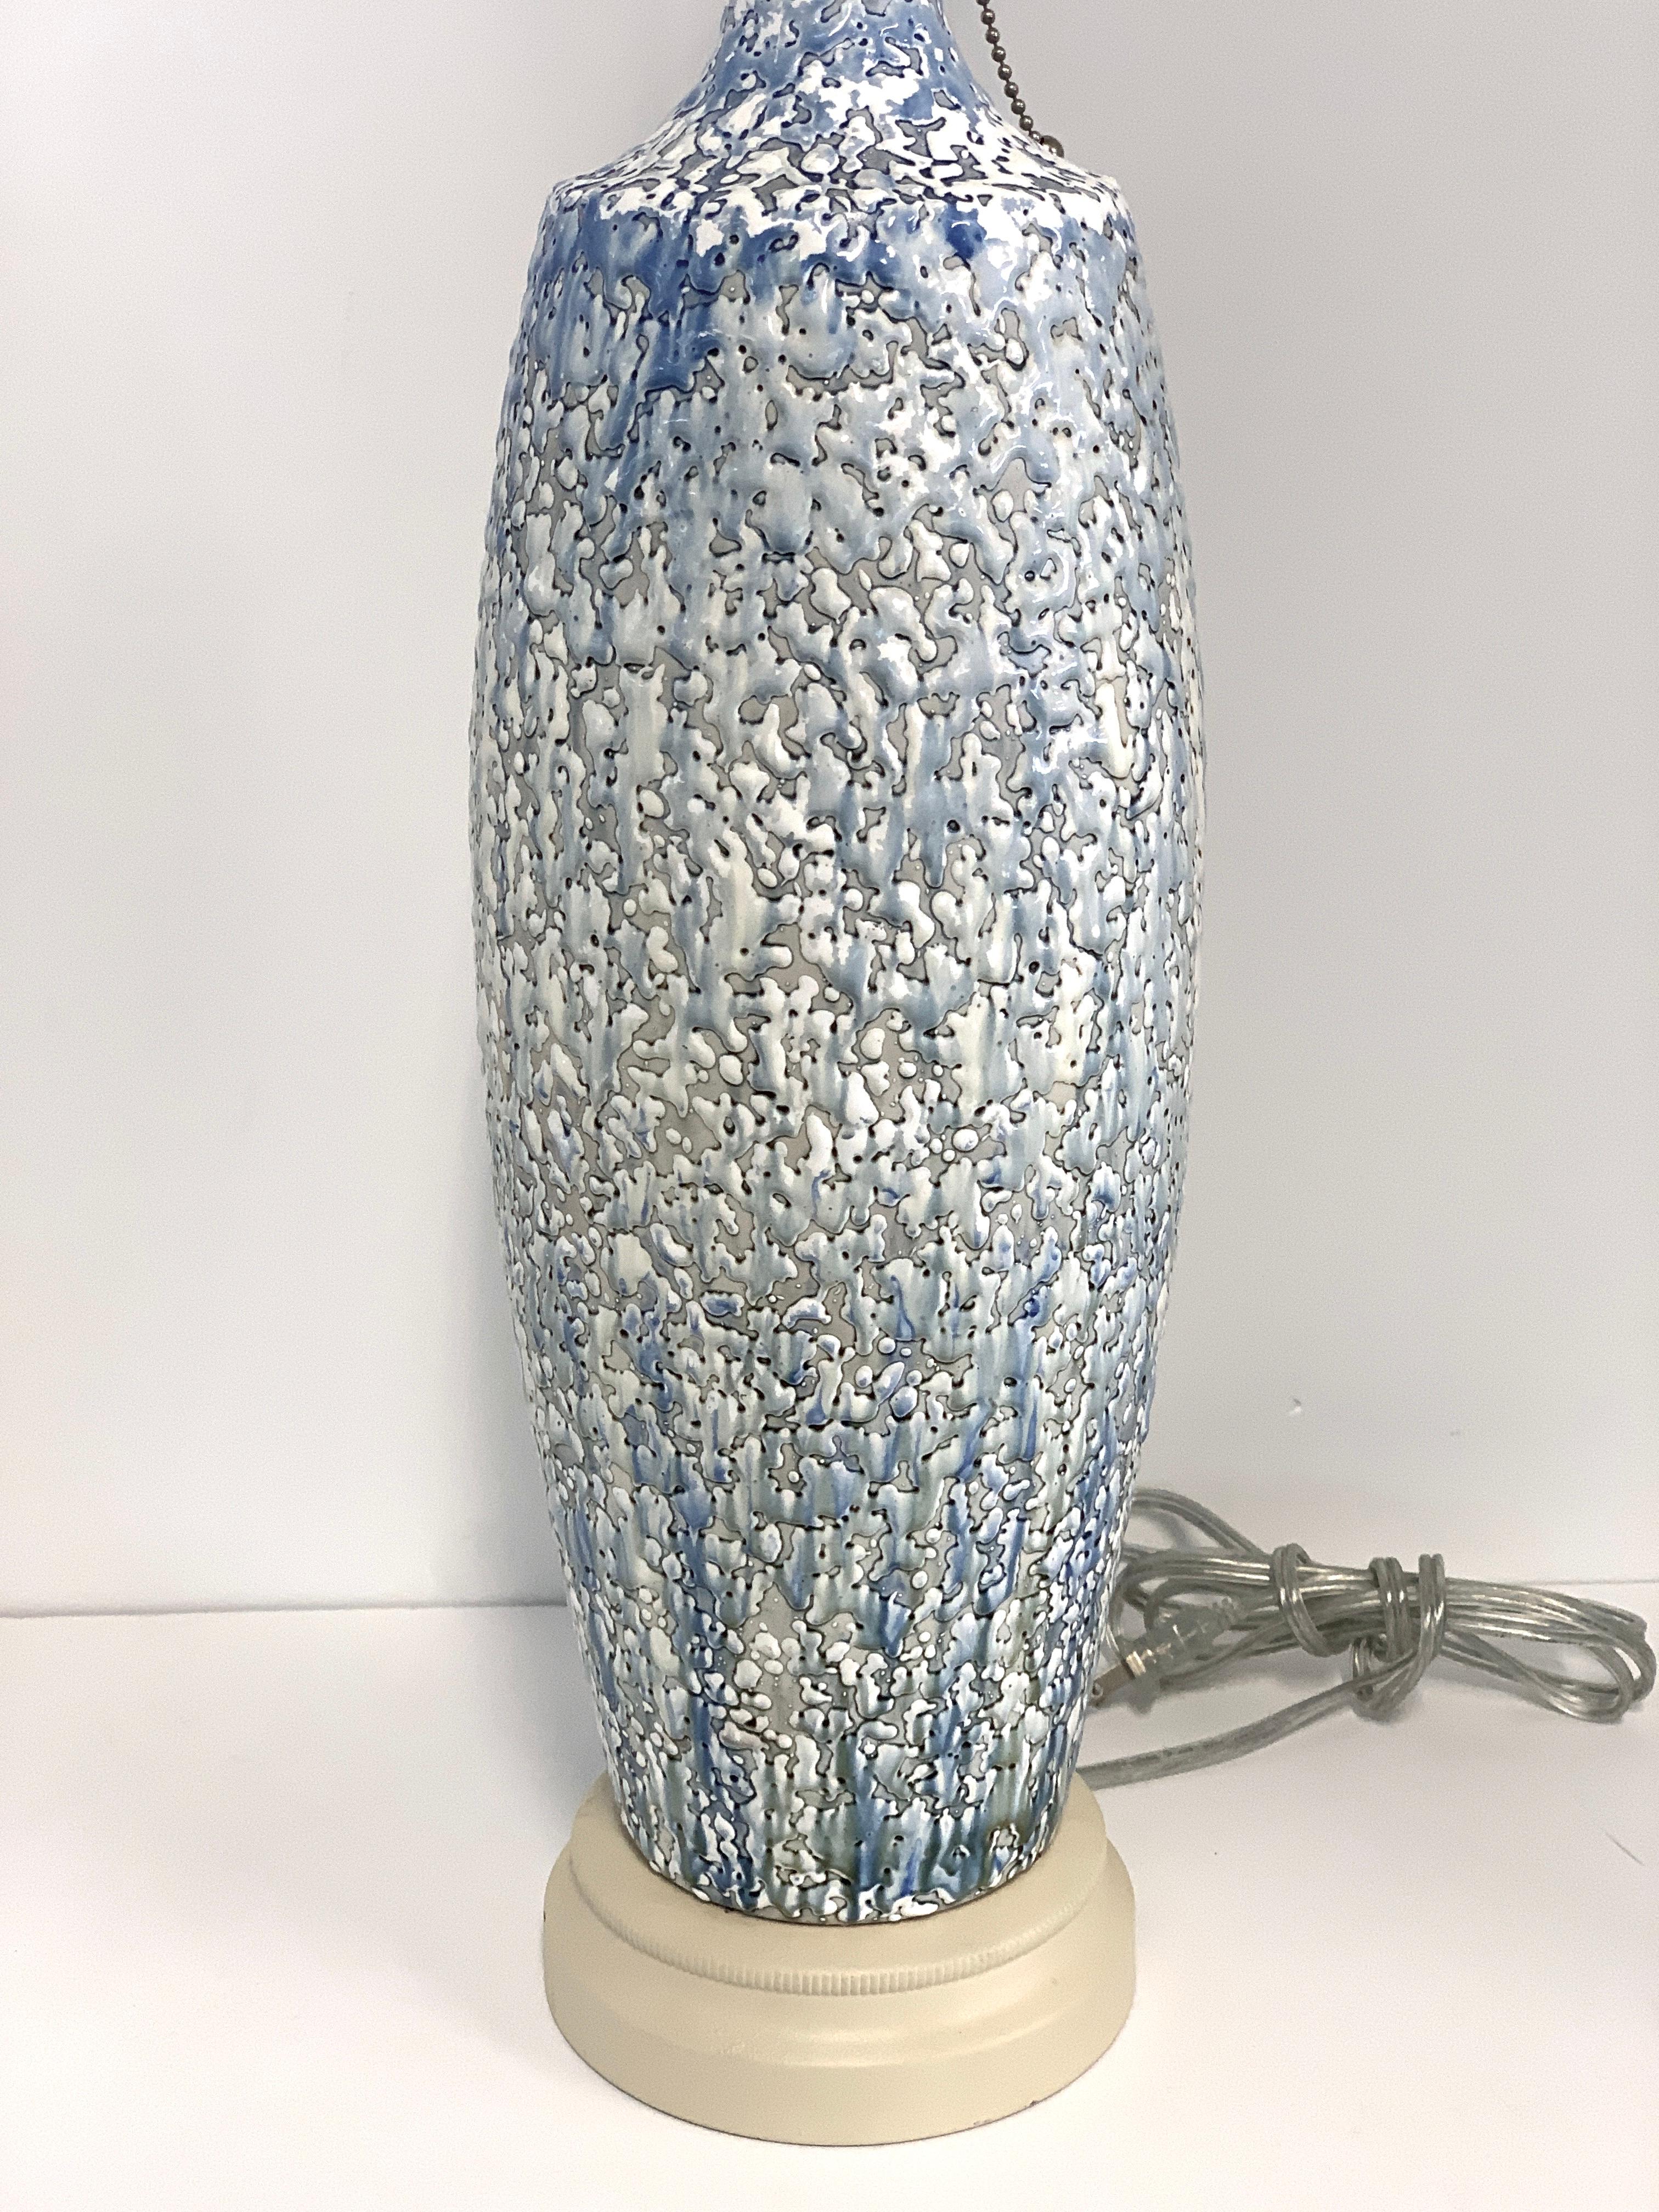 A pretty ceramic lamp with a drip glaze finish. It has been re-wired and fitted with a new nickel socket. The caps and base were left in their original off white paint. There are some minor spots of paint loss to the painted parts, the ceramic is